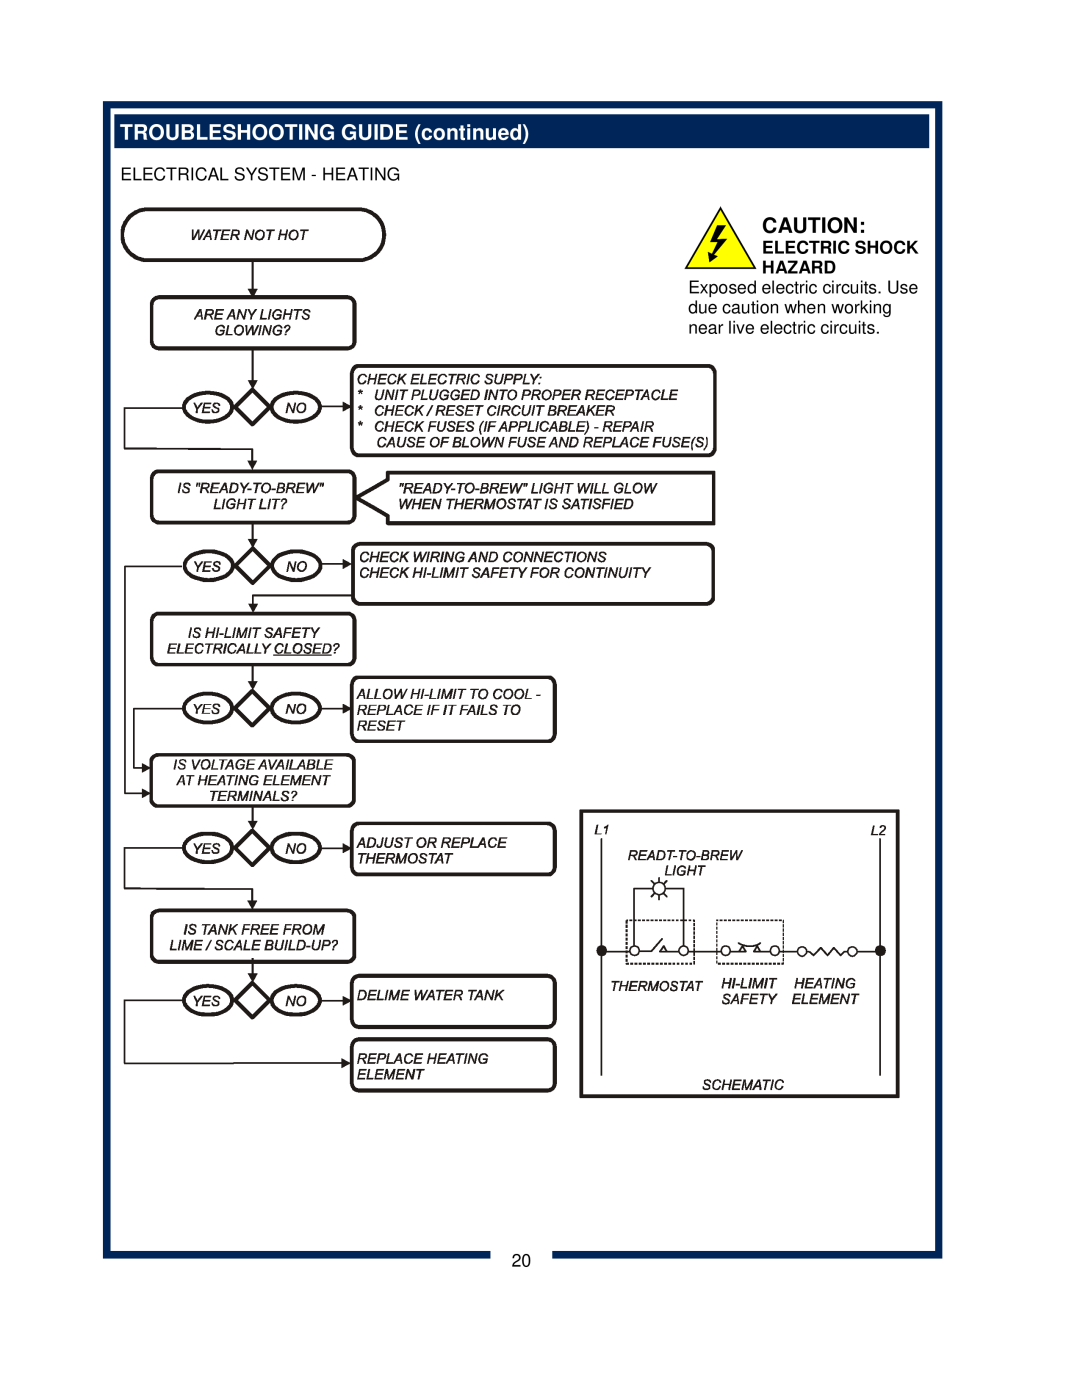 Bloomfield 600 manual TROUBLESHOOTING GUIDE continued, Electrical System - Heating, Electric Shock Hazard 